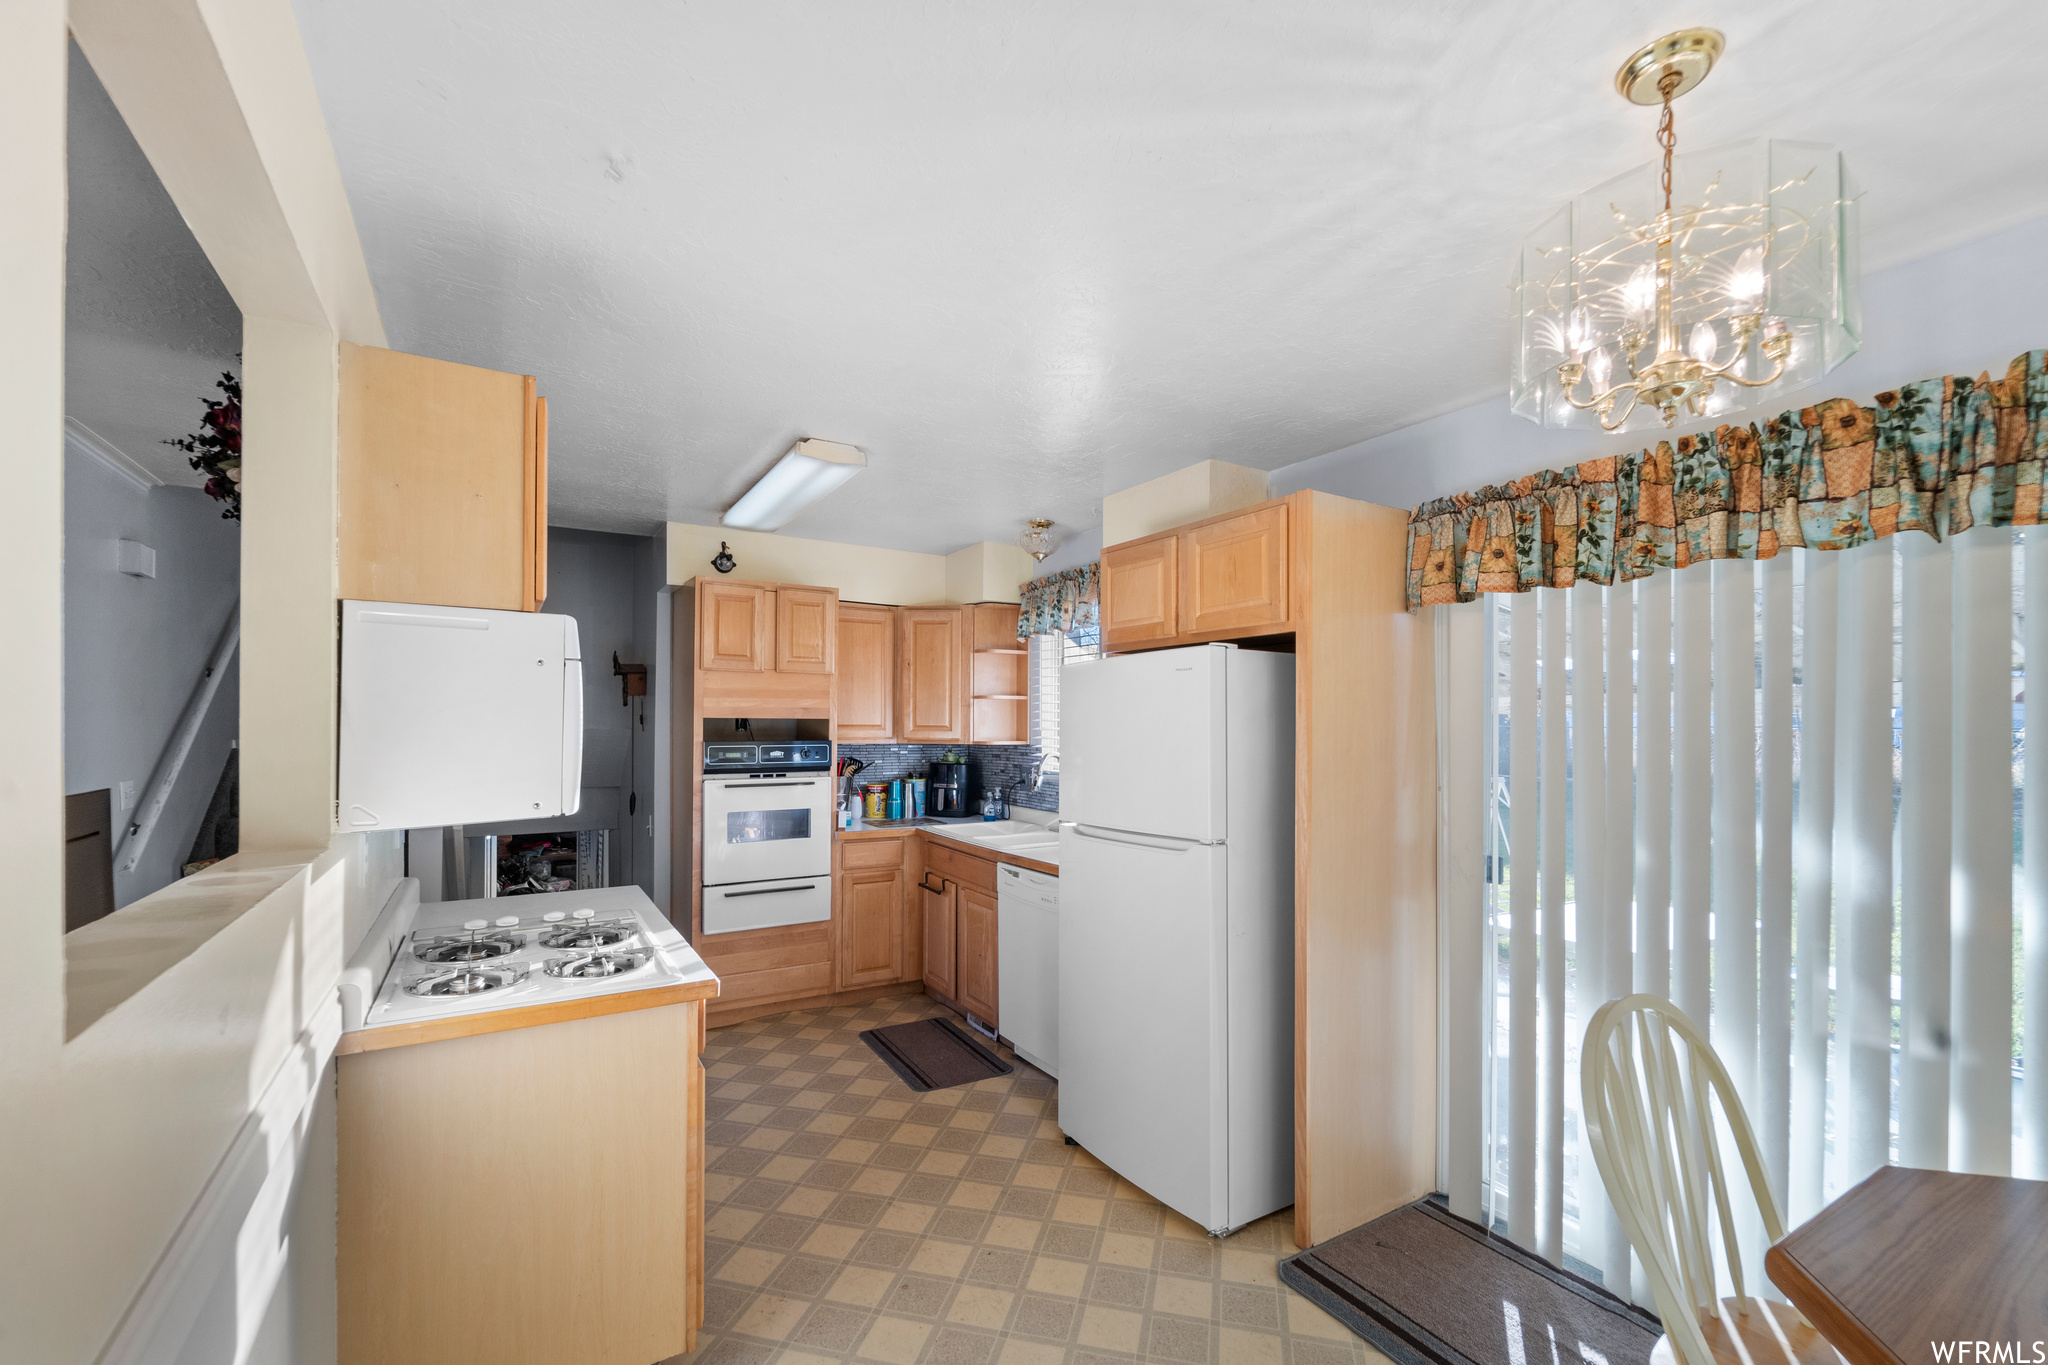 Kitchen featuring white appliances, plenty of natural light, a chandelier, and decorative light fixtures